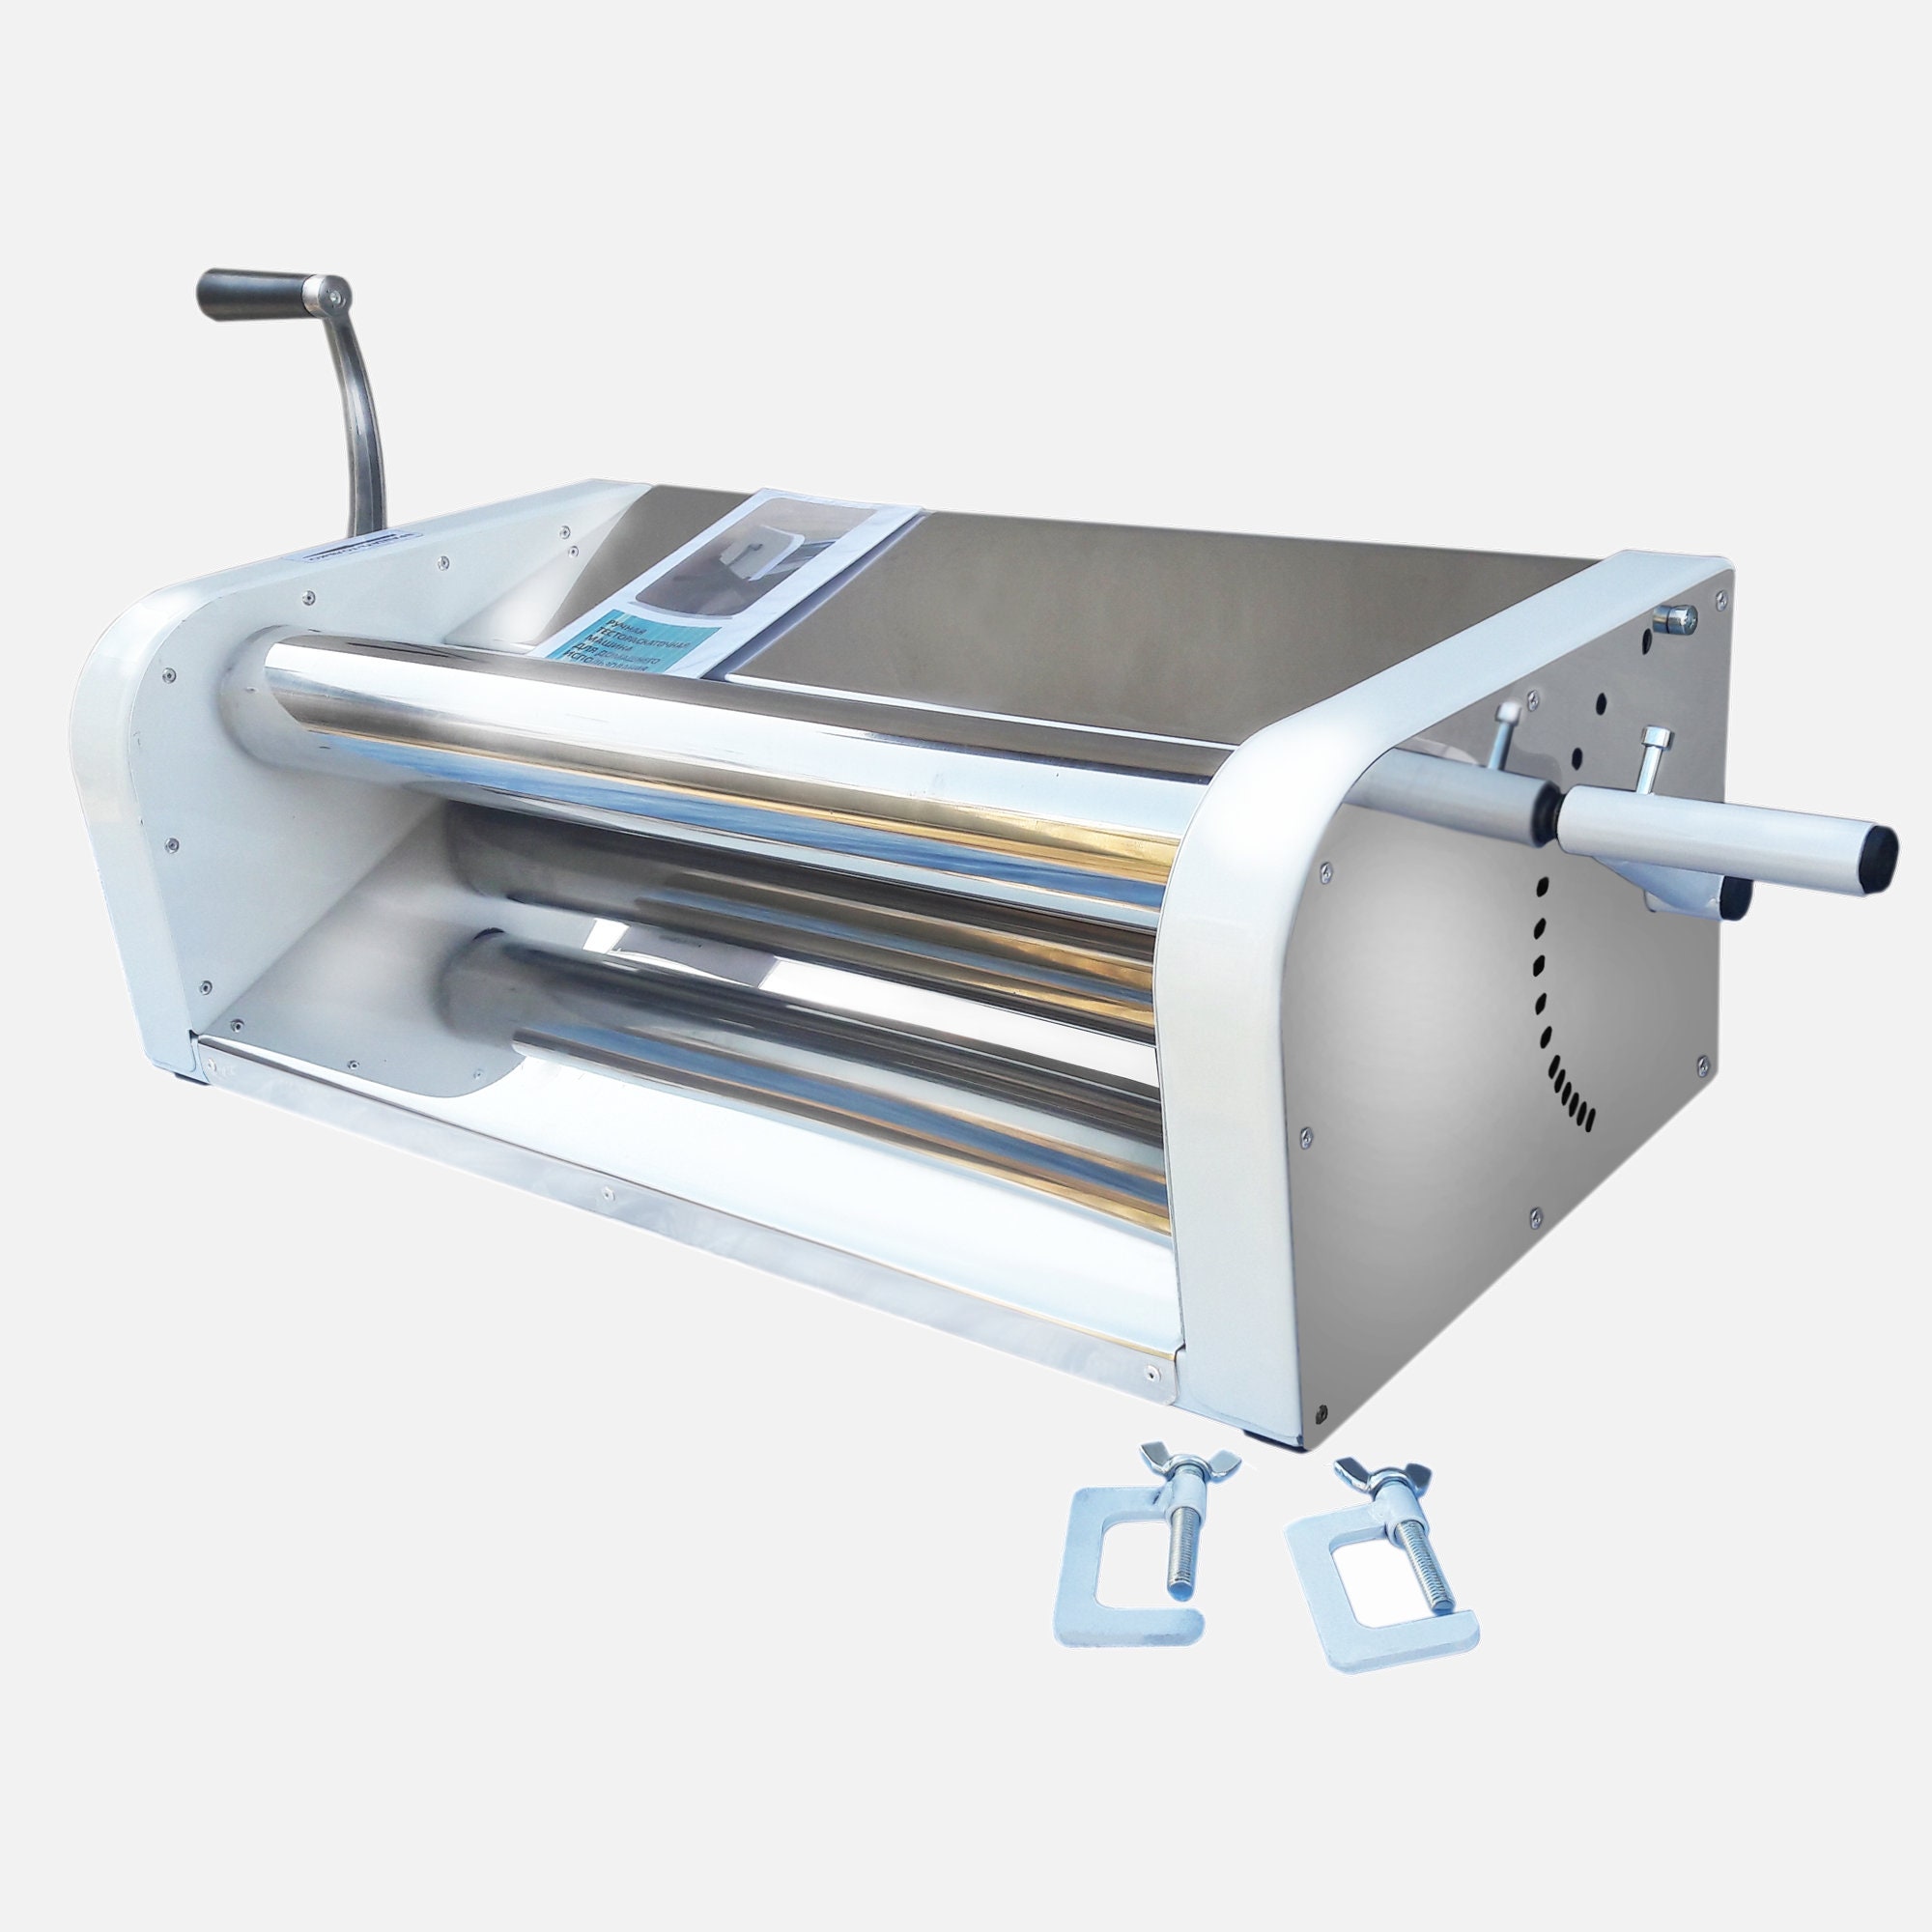 Dough Sheeter Electric for Home Use and Cafe, Dough Roller, Pastry Sheeter,  FREE Worldwide Shipping by DHL, for Croissant, Dough Roller 